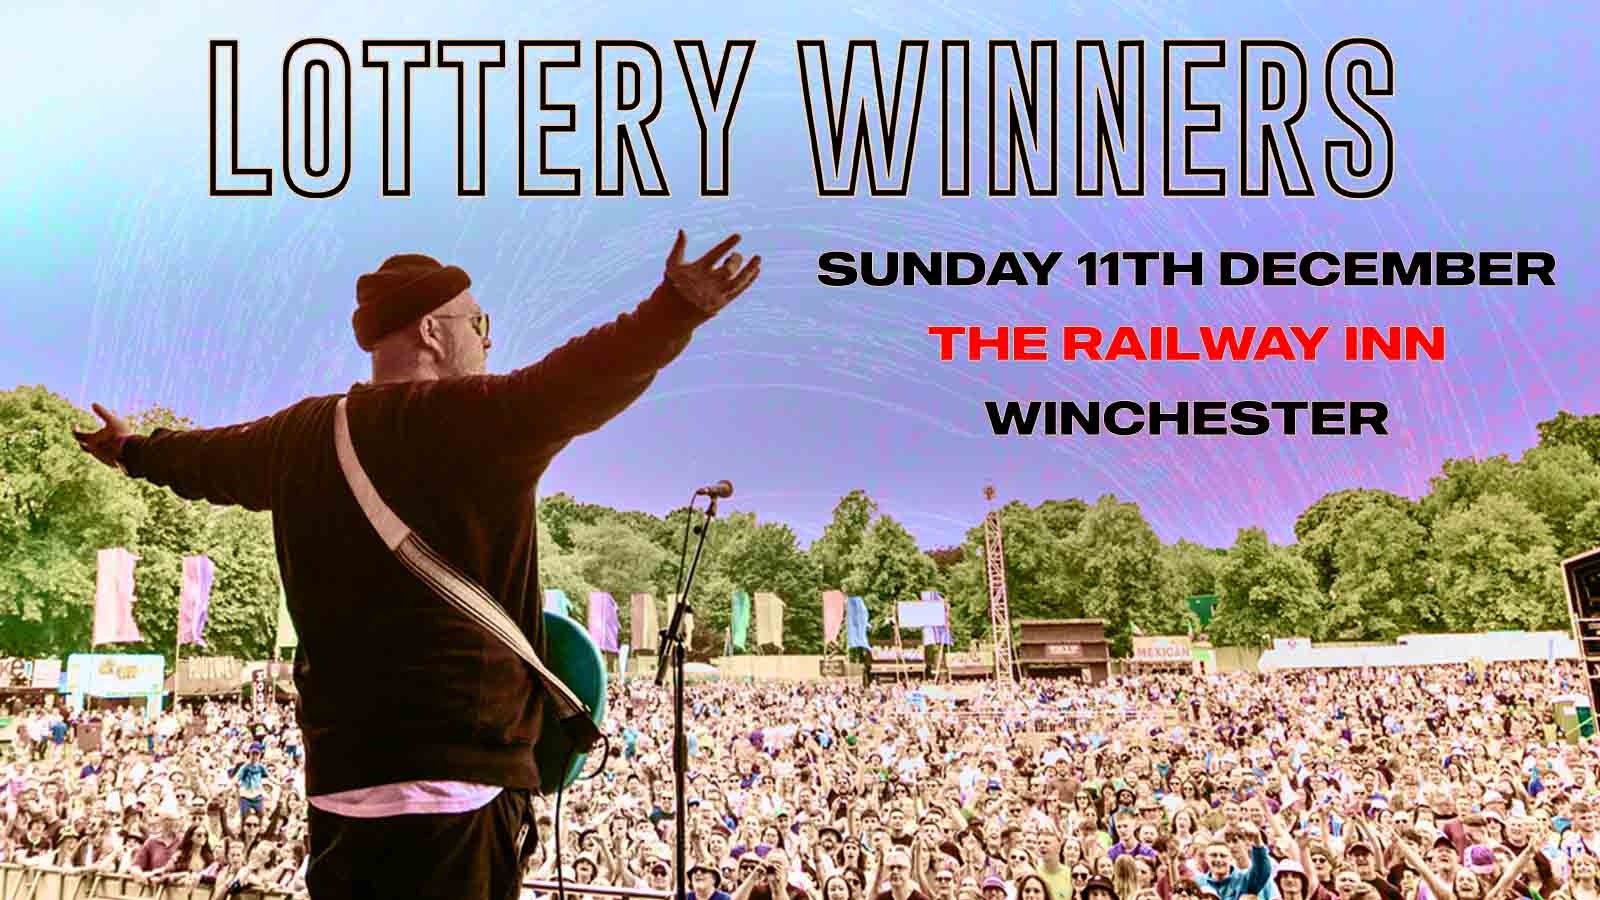 Lottery Winners at The Railway Inn, Winchester